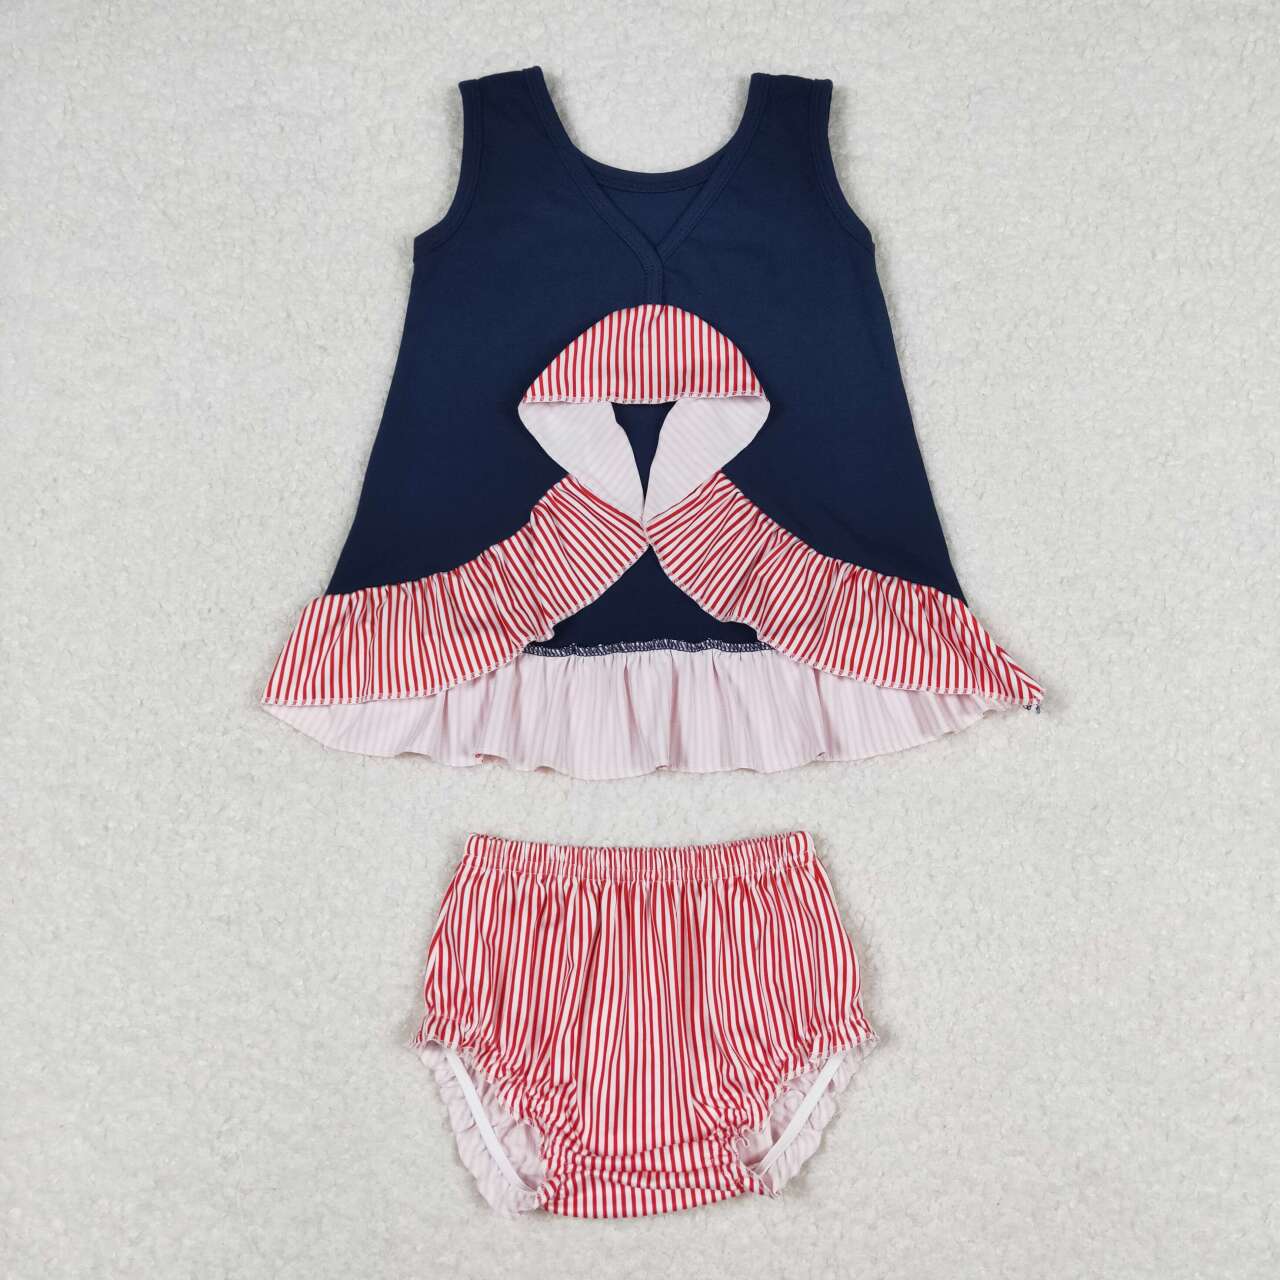 GBO0209 Baseball Embroidery Navy Top Red Stripes Shorts Baby Girls Bummie Set